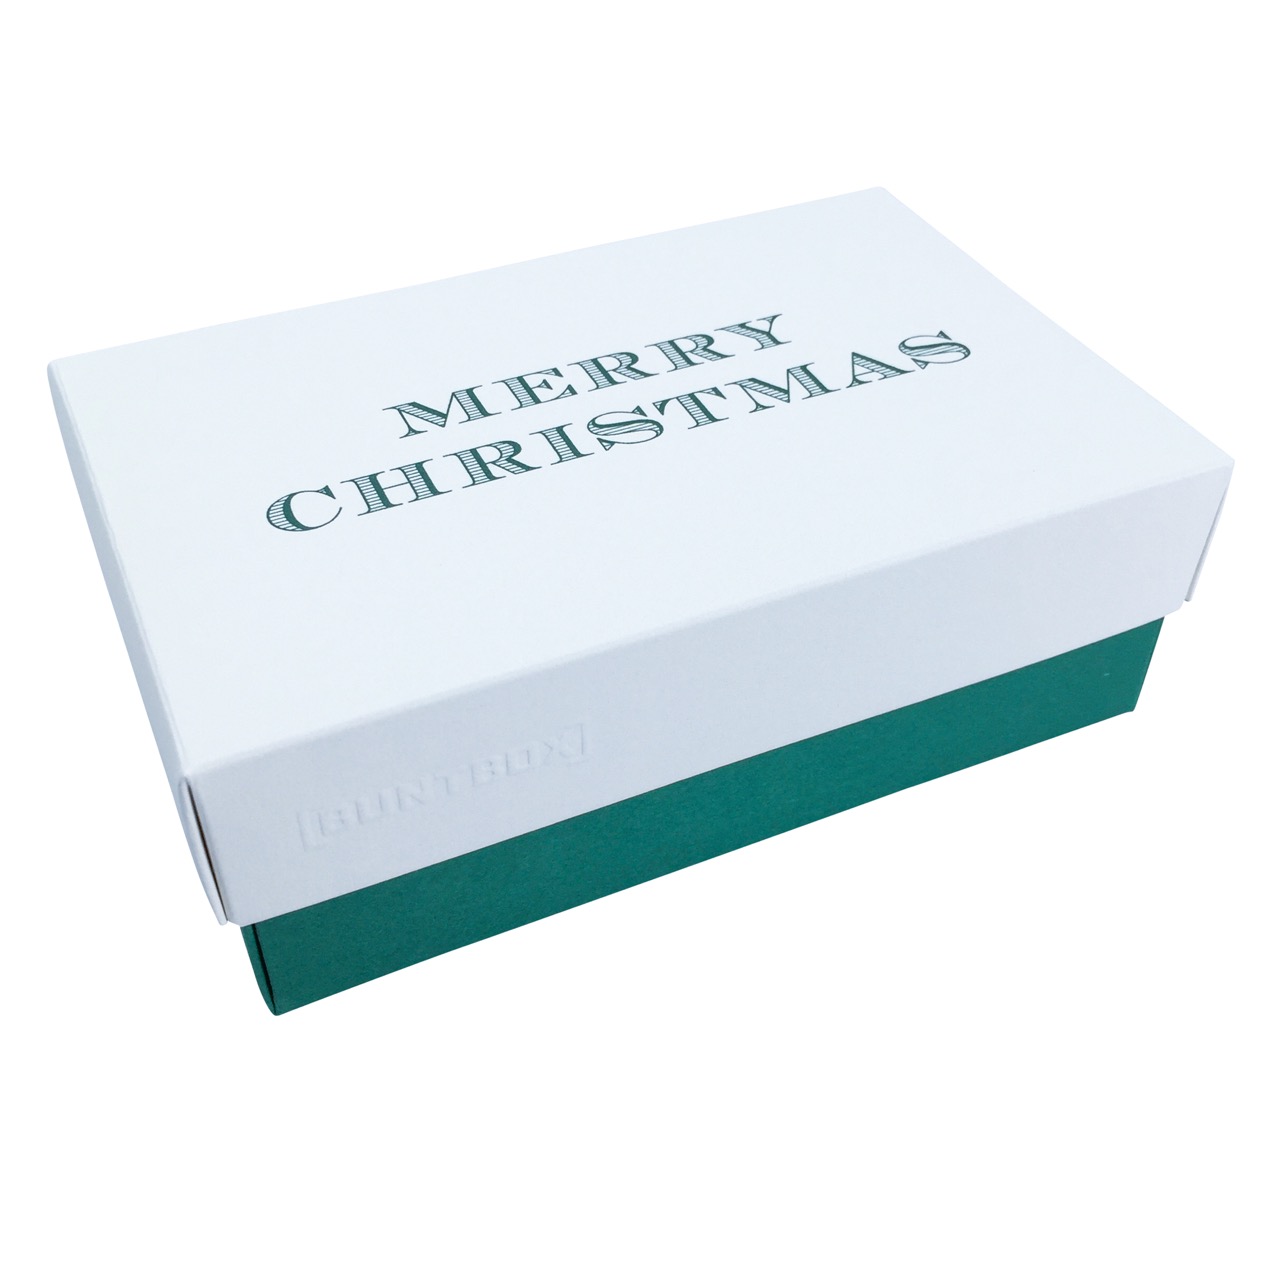 Buntbox L Fine Paper Christmas in Champagner-Emerald